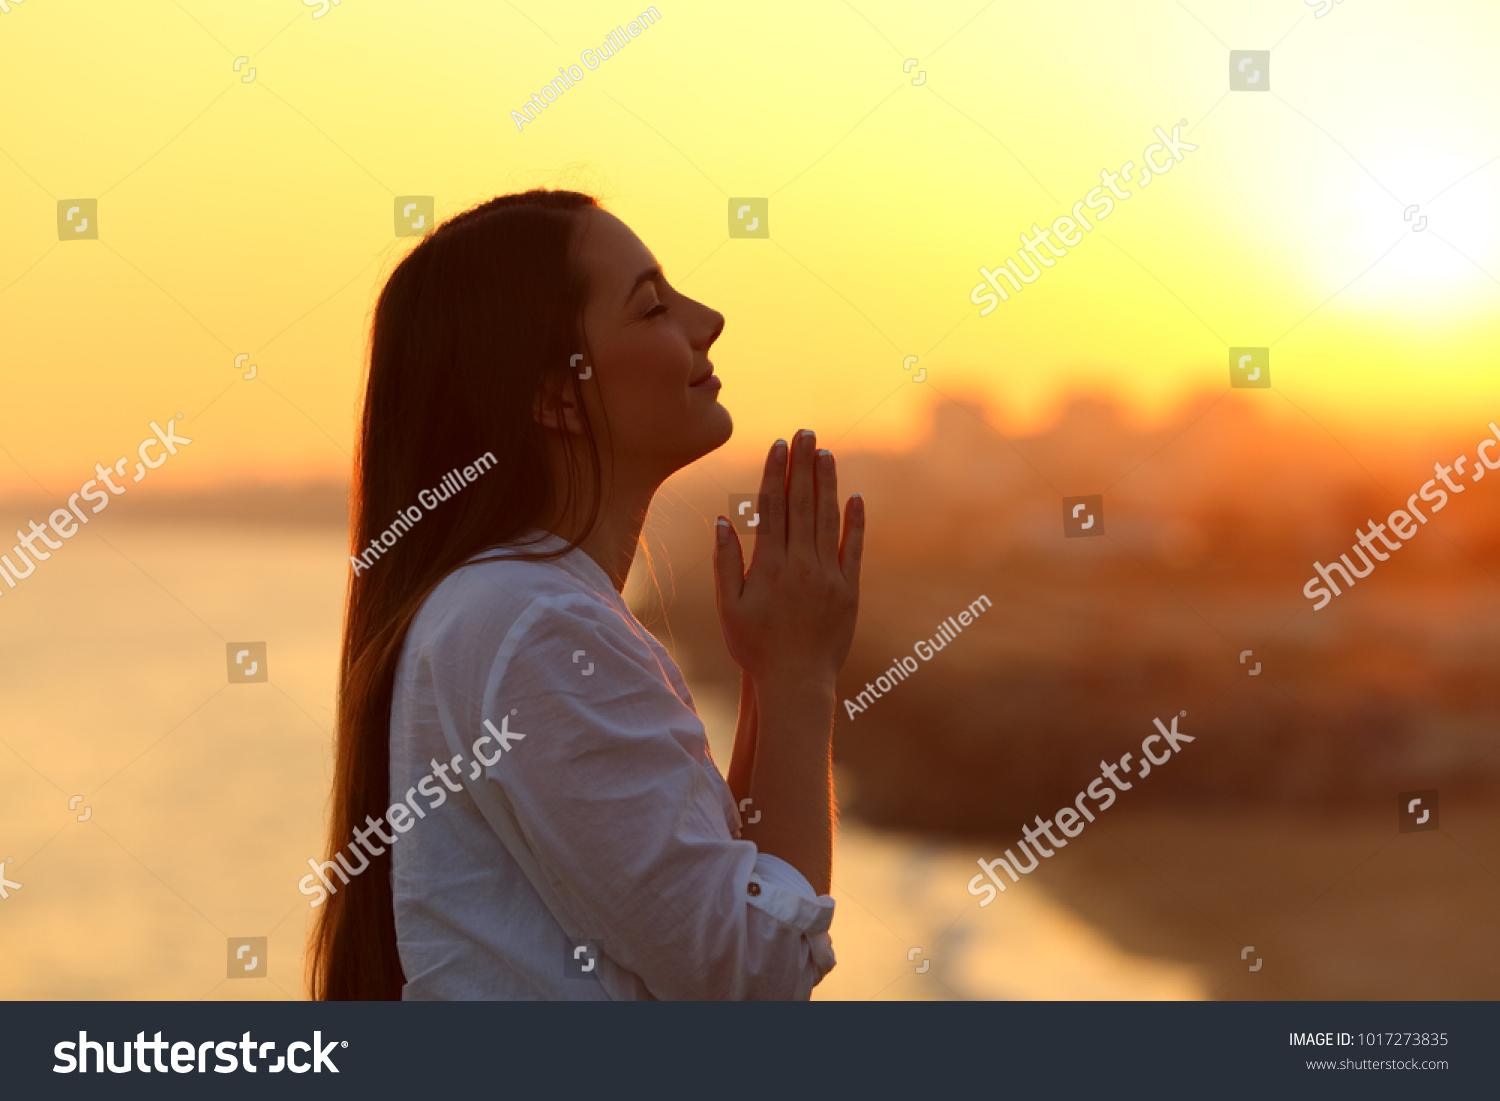 Side view backlight portrait of a woman praying and looking above at sunset #1017273835